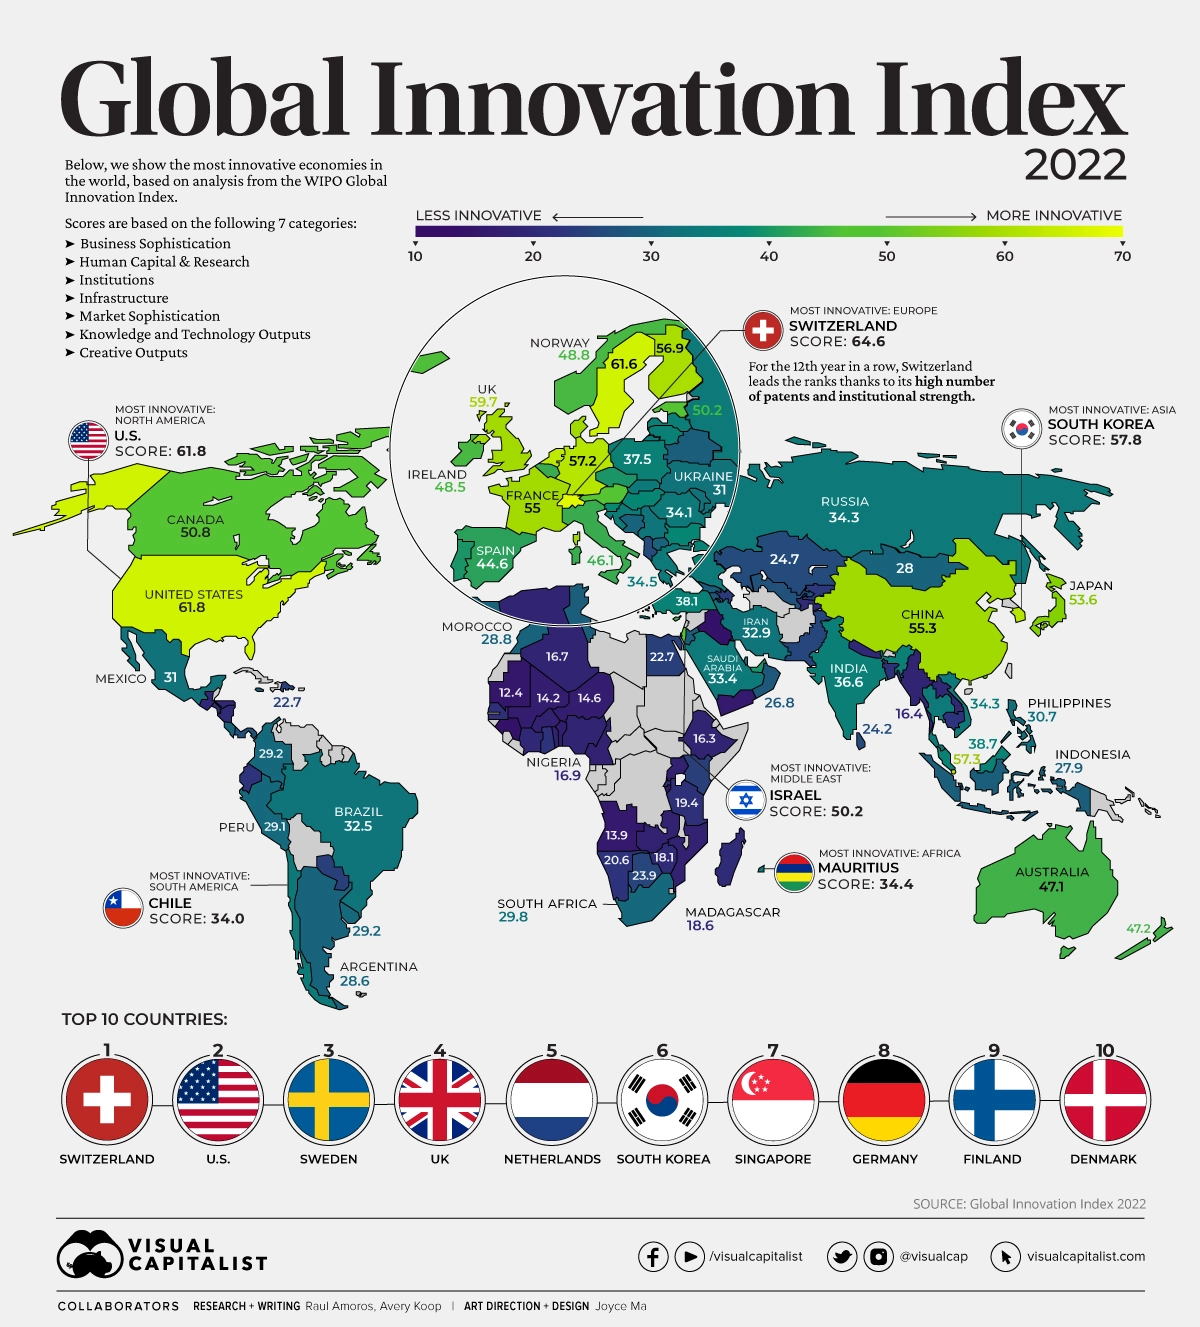 The Top 10 Innovative Countries in the World 2022